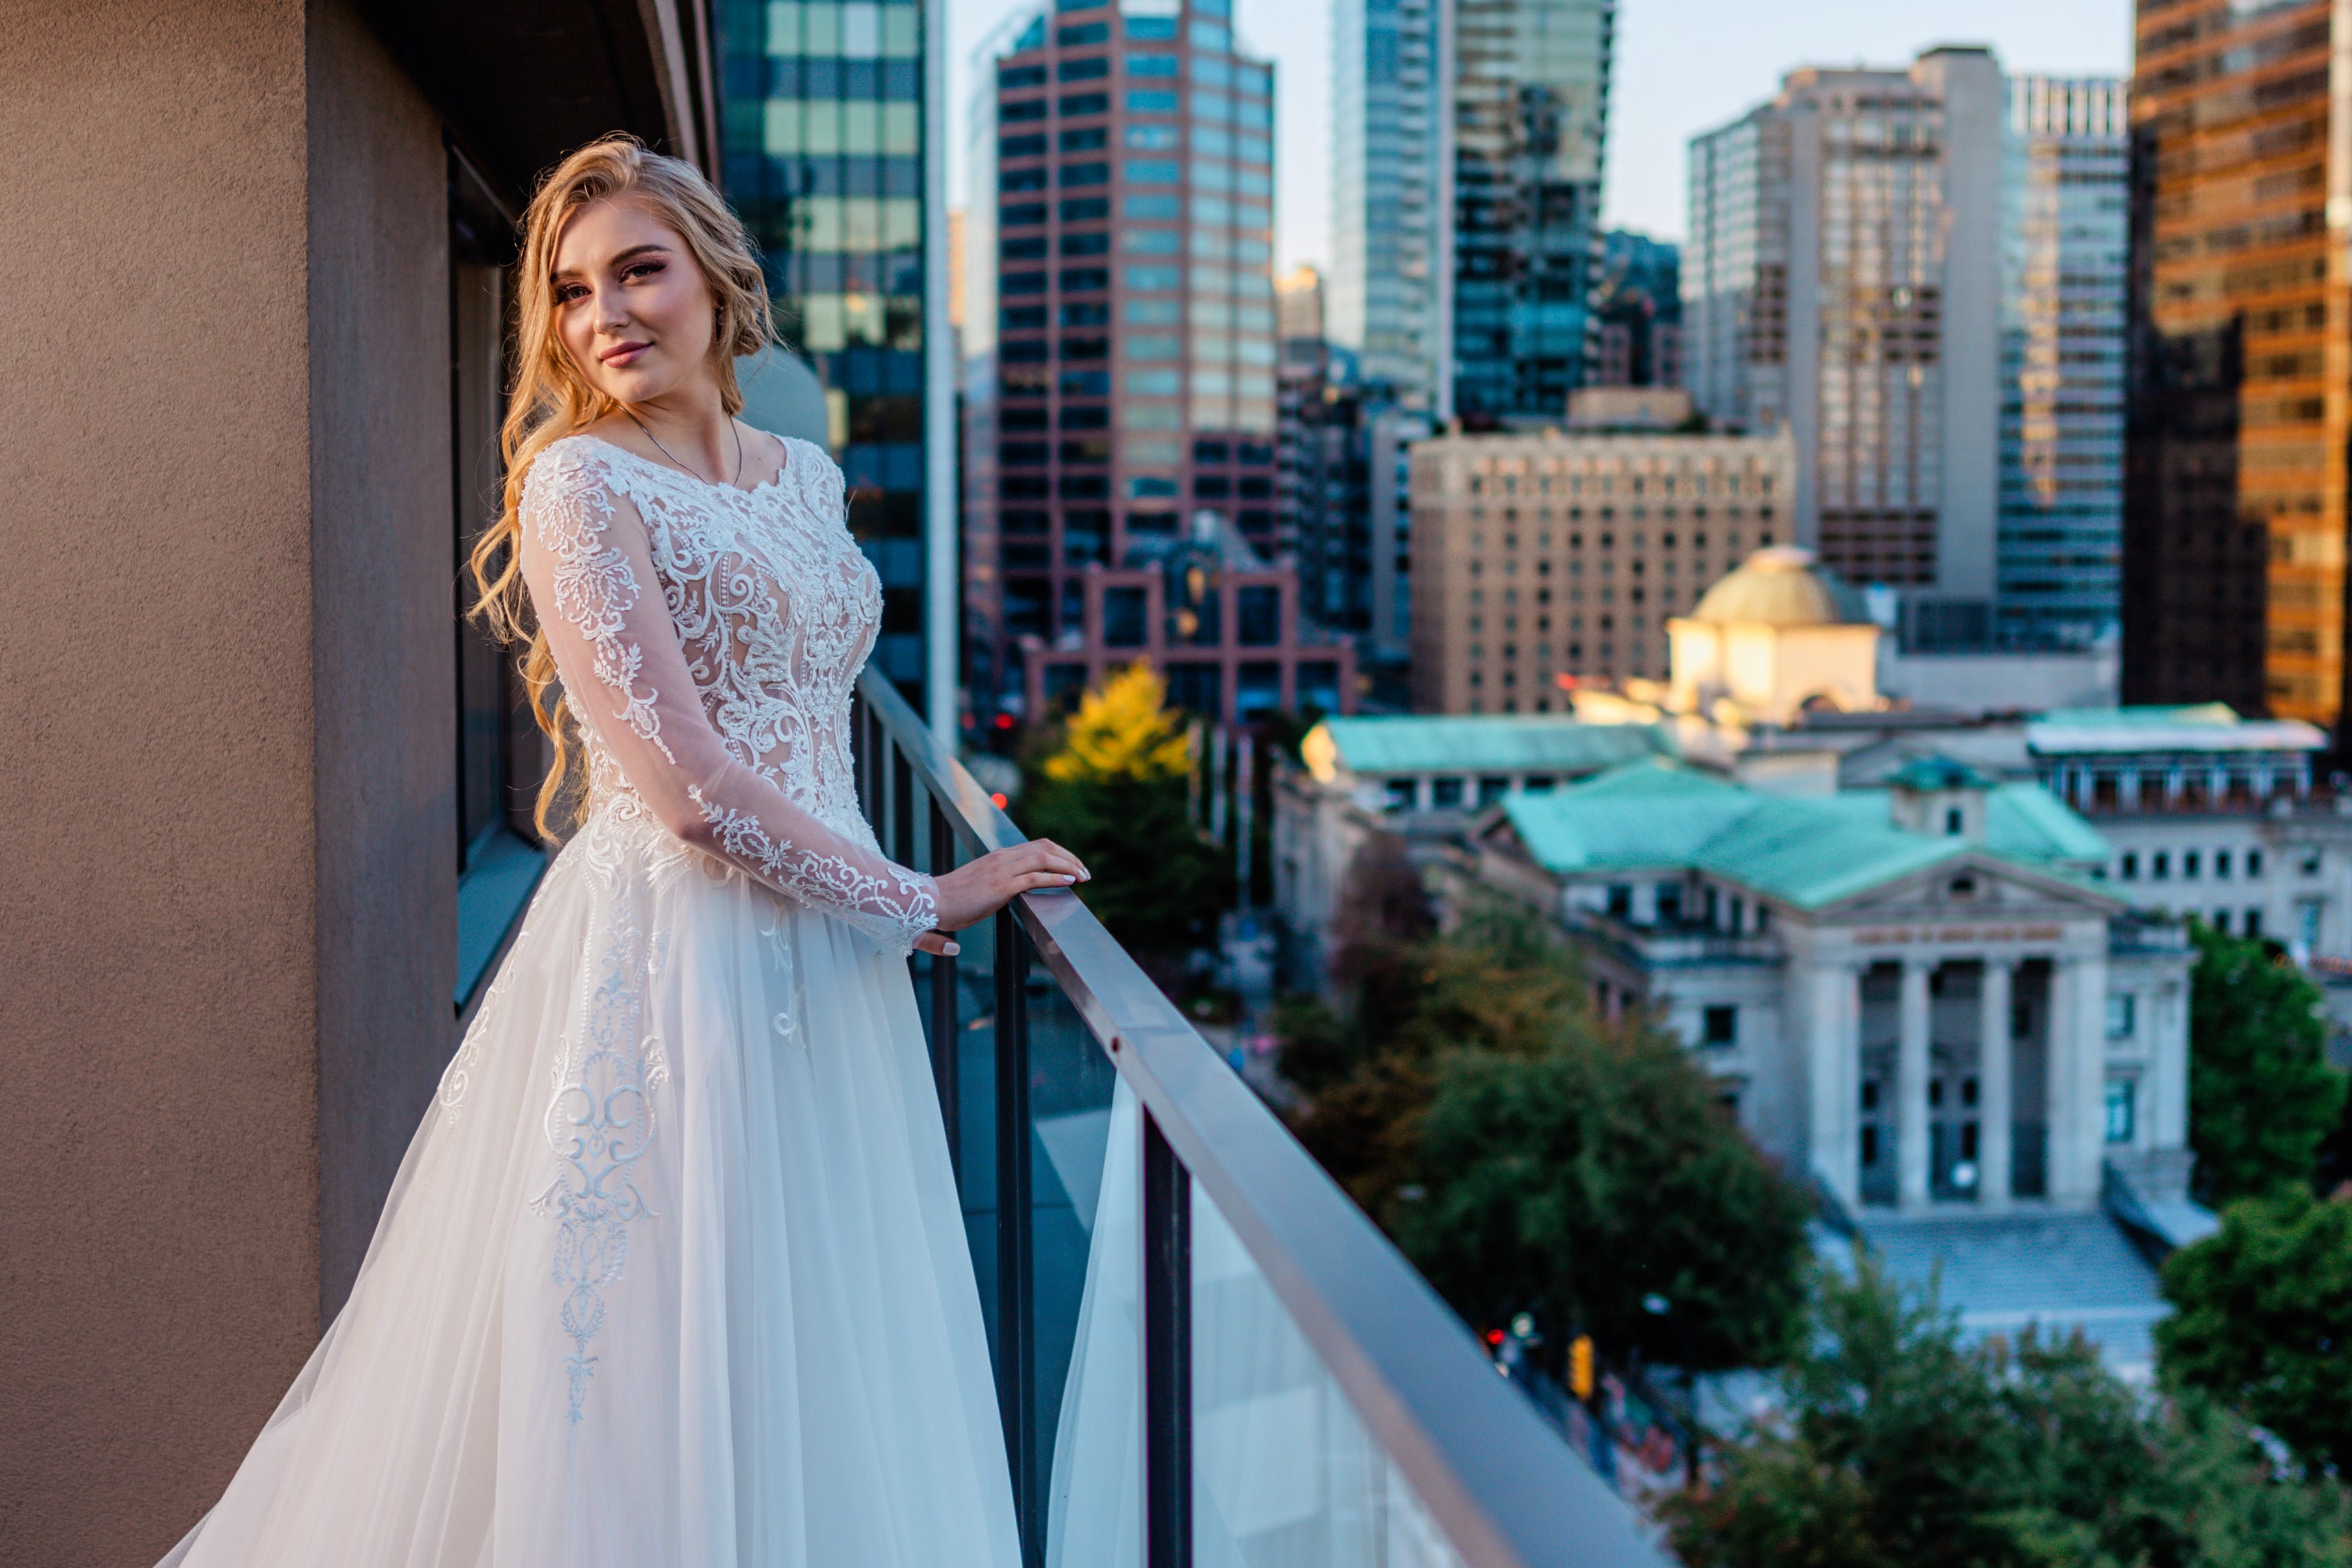 Styled Wedding Shoot at the Wedgewood Hotel & Spa